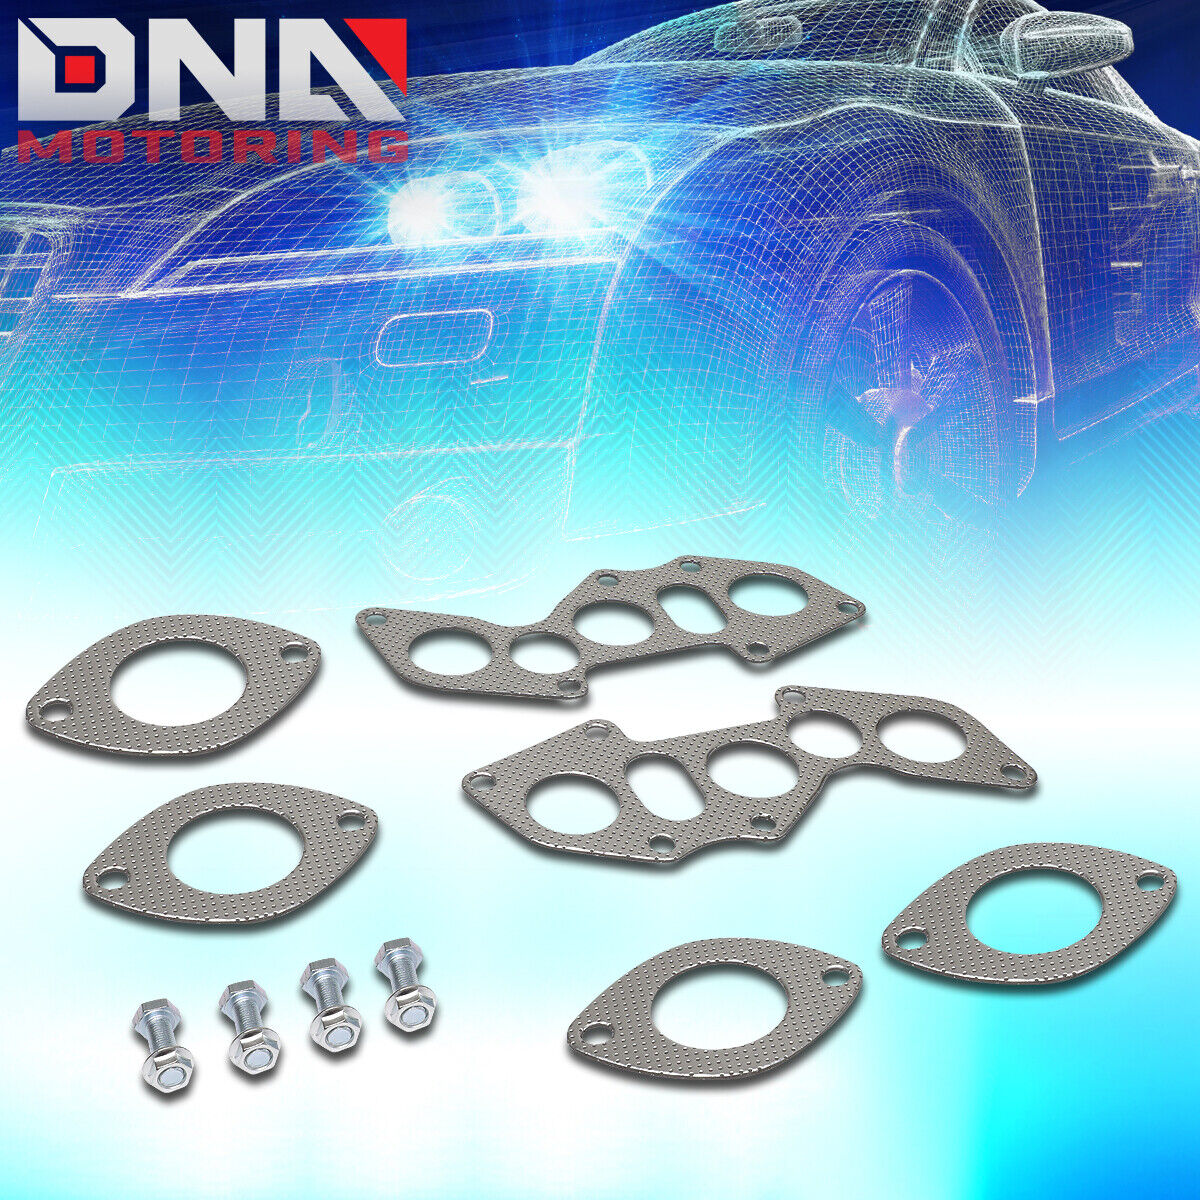 FOR 2006-2013 IS250 IS350 ENGINE EXHAUST MANIFOLD HEADER ALUMINUM GASKET SET